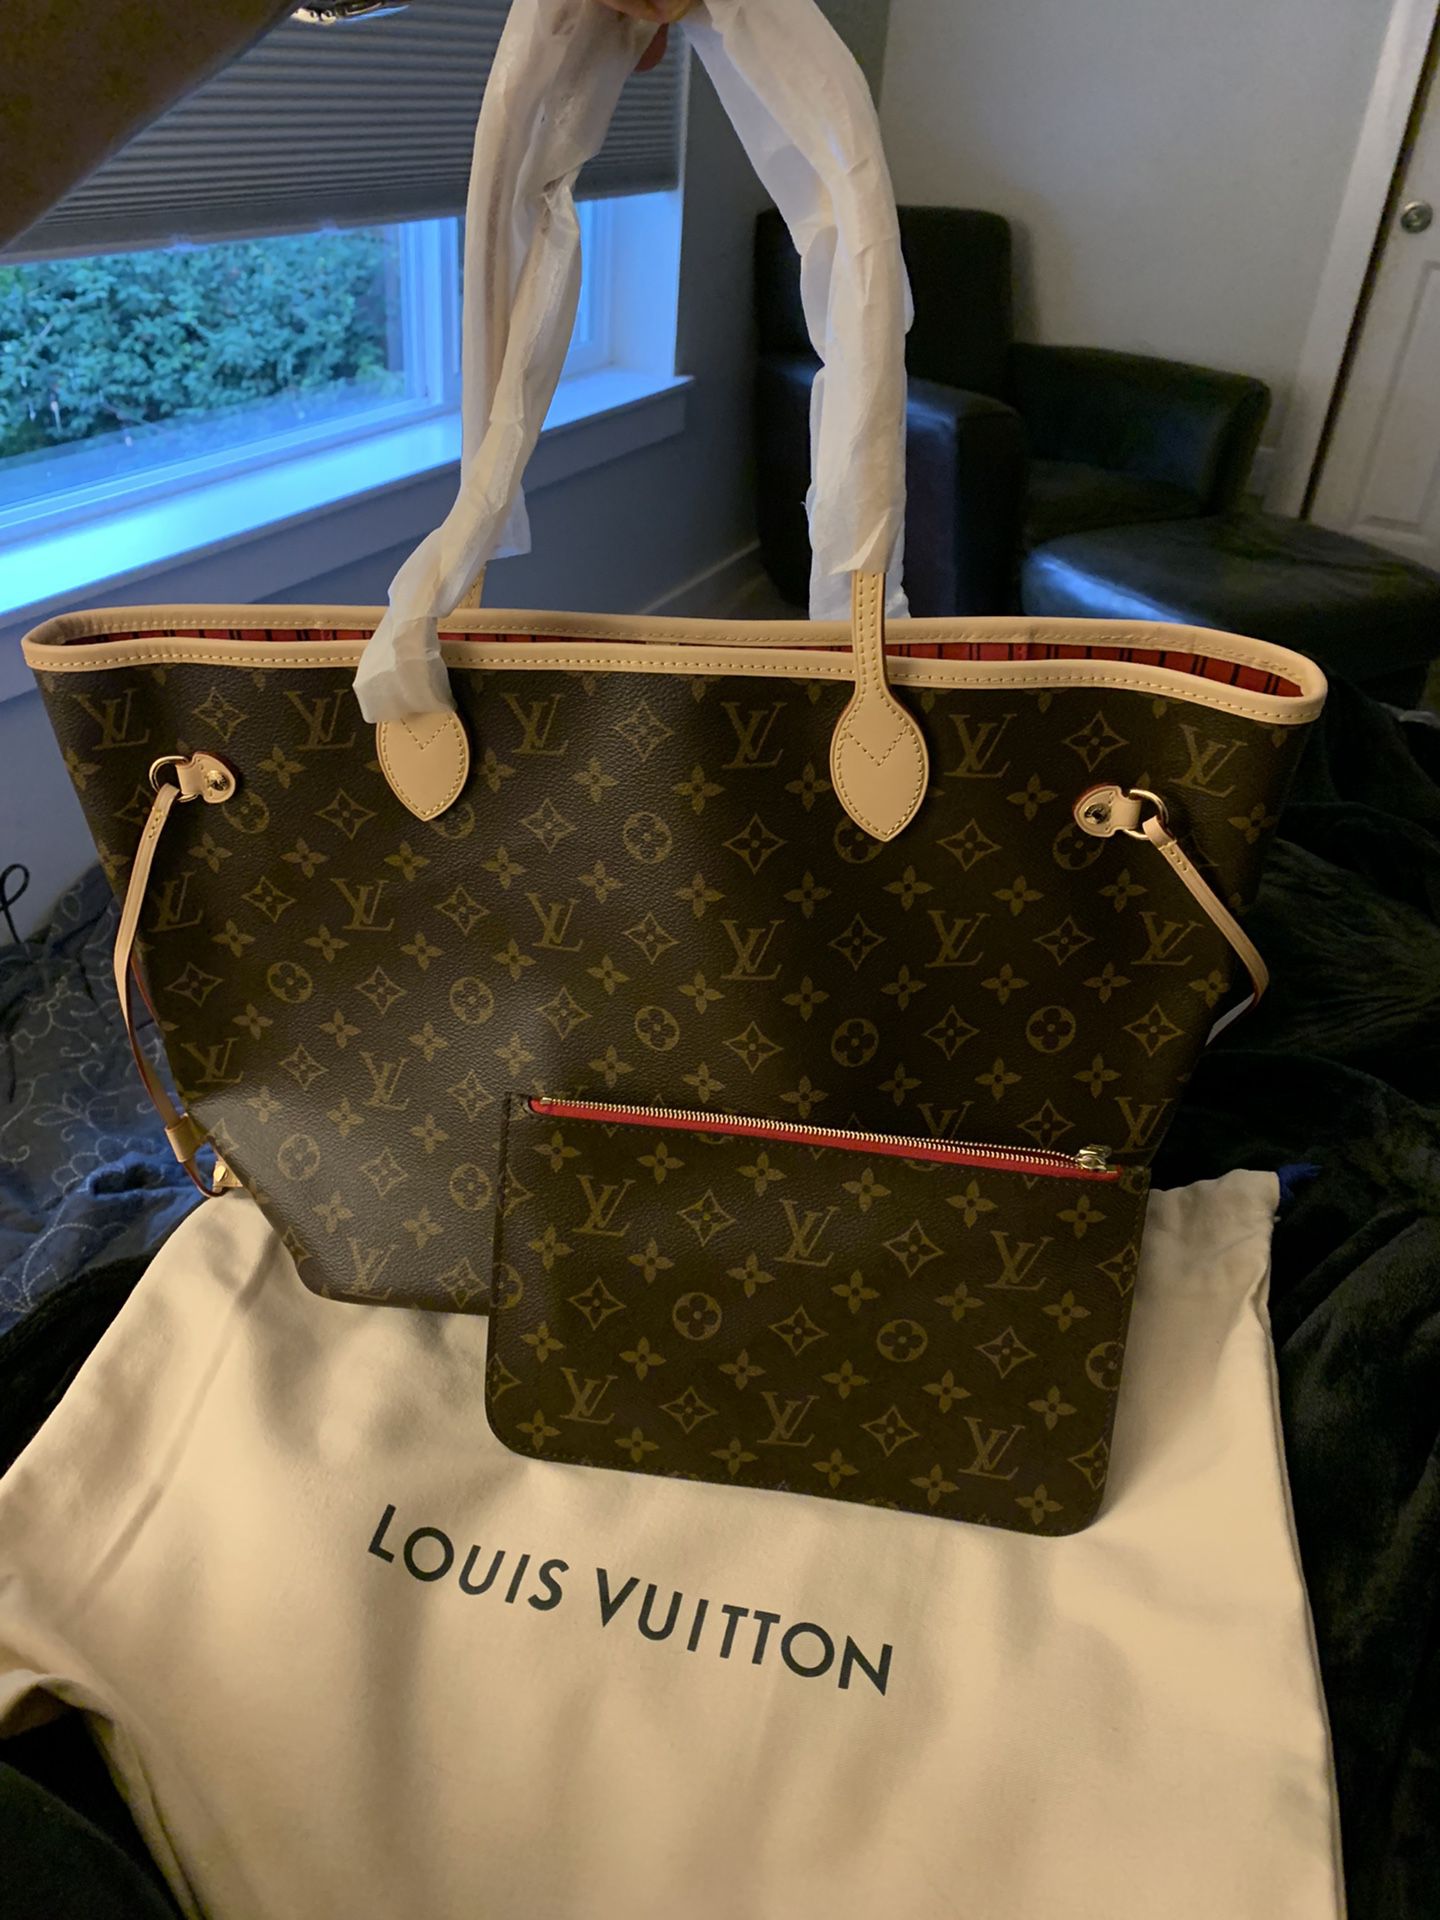 New lining for my new Louis Vuitton Purse!!